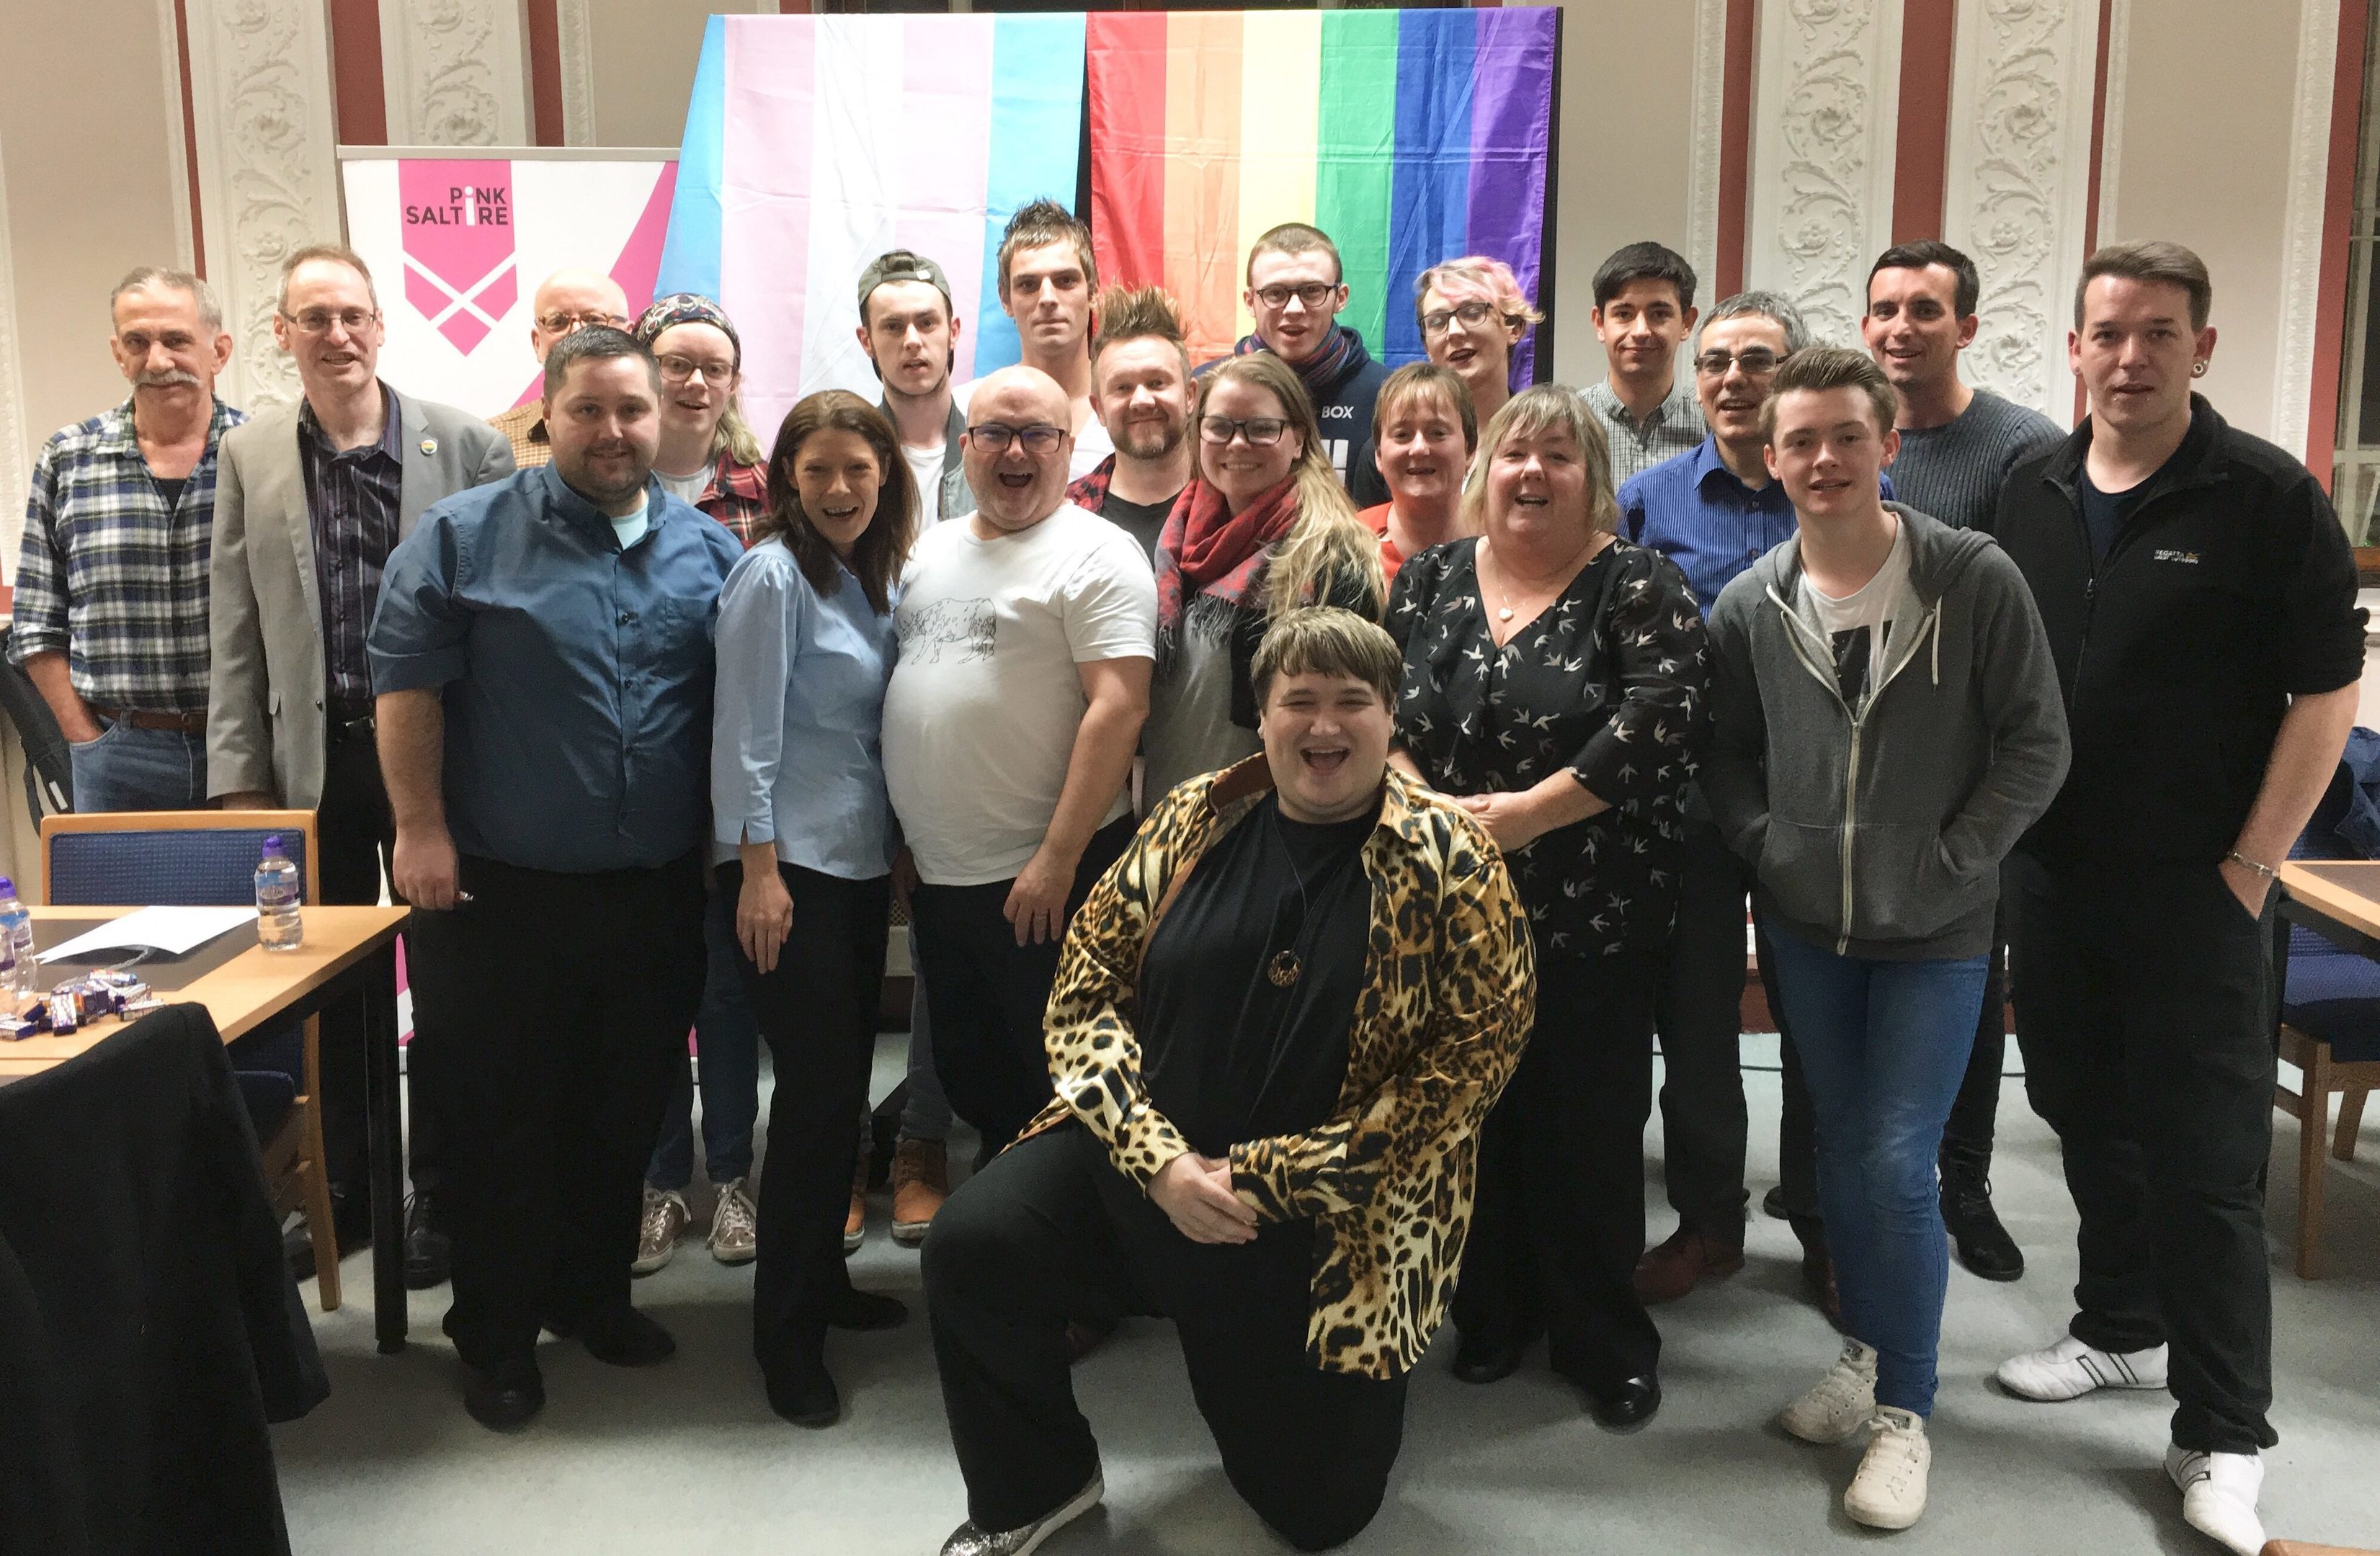 The new Dundee Pride board held their first meeting on Monday